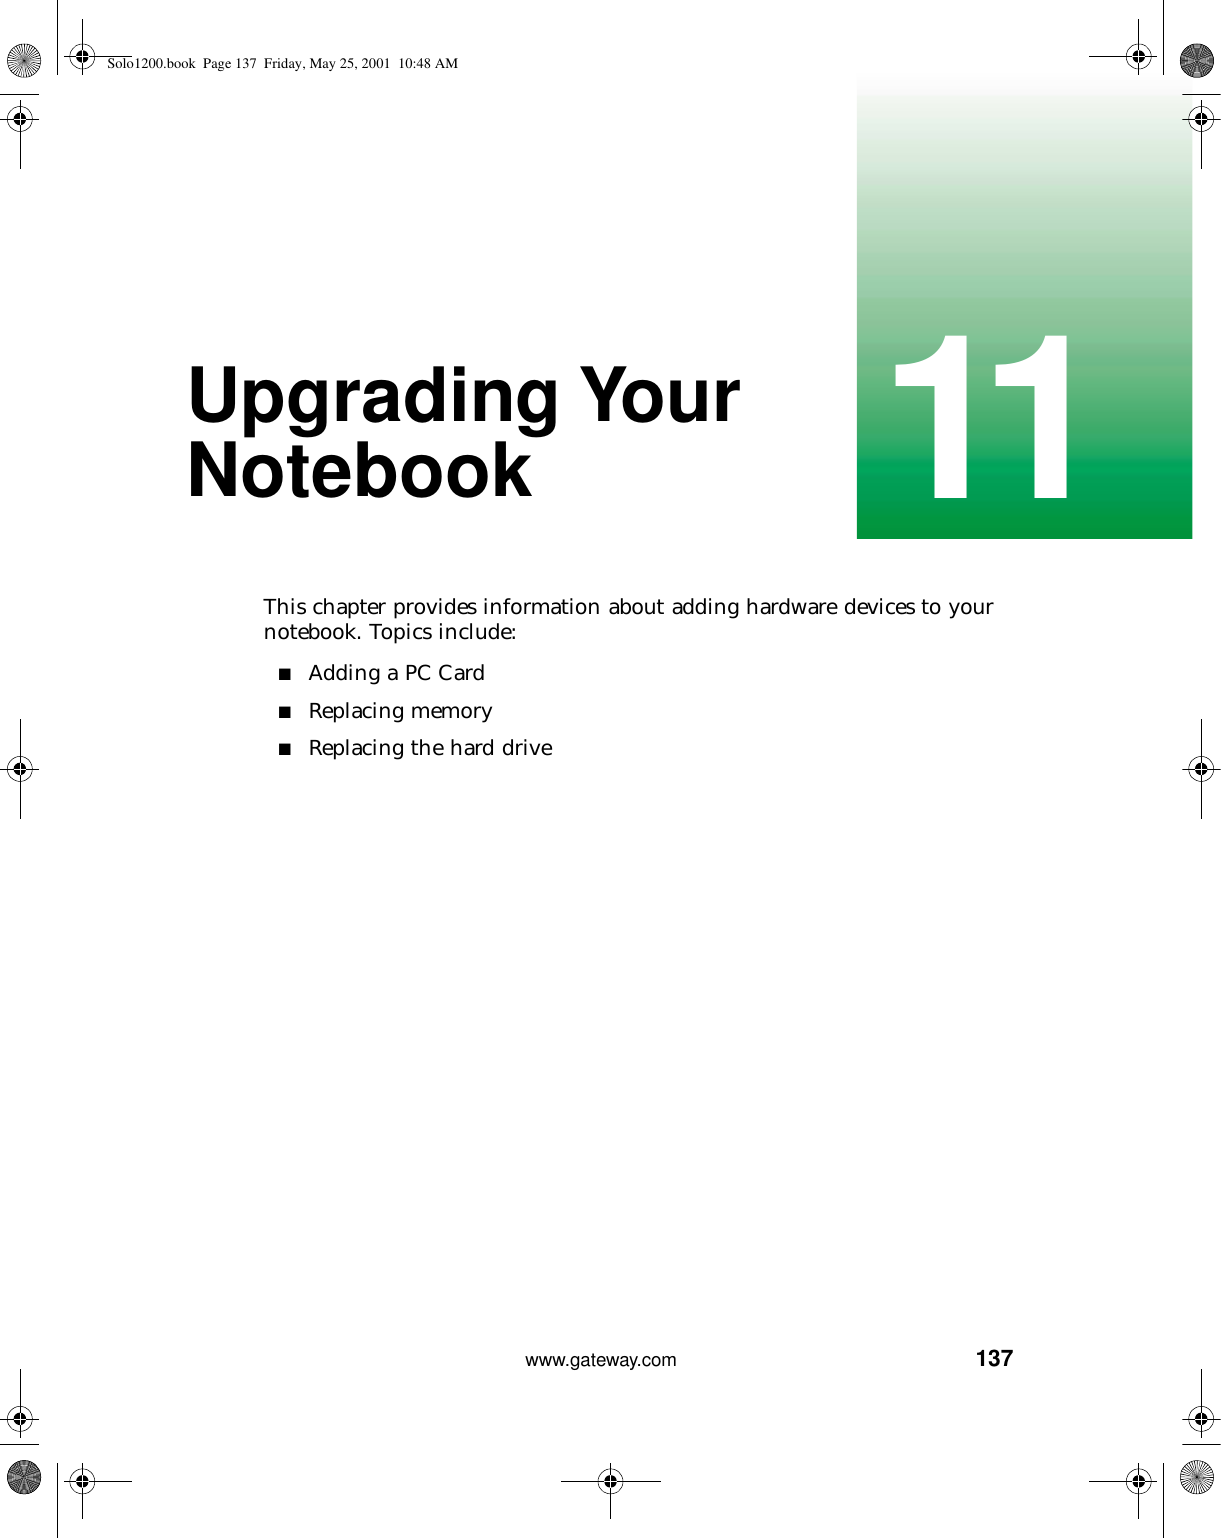 13711www.gateway.comUpgrading Your NotebookThis chapter provides information about adding hardware devices to your notebook. Topics include:■Adding a PC Card■Replacing memory■Replacing the hard driveSolo1200.book Page 137 Friday, May 25, 2001 10:48 AM